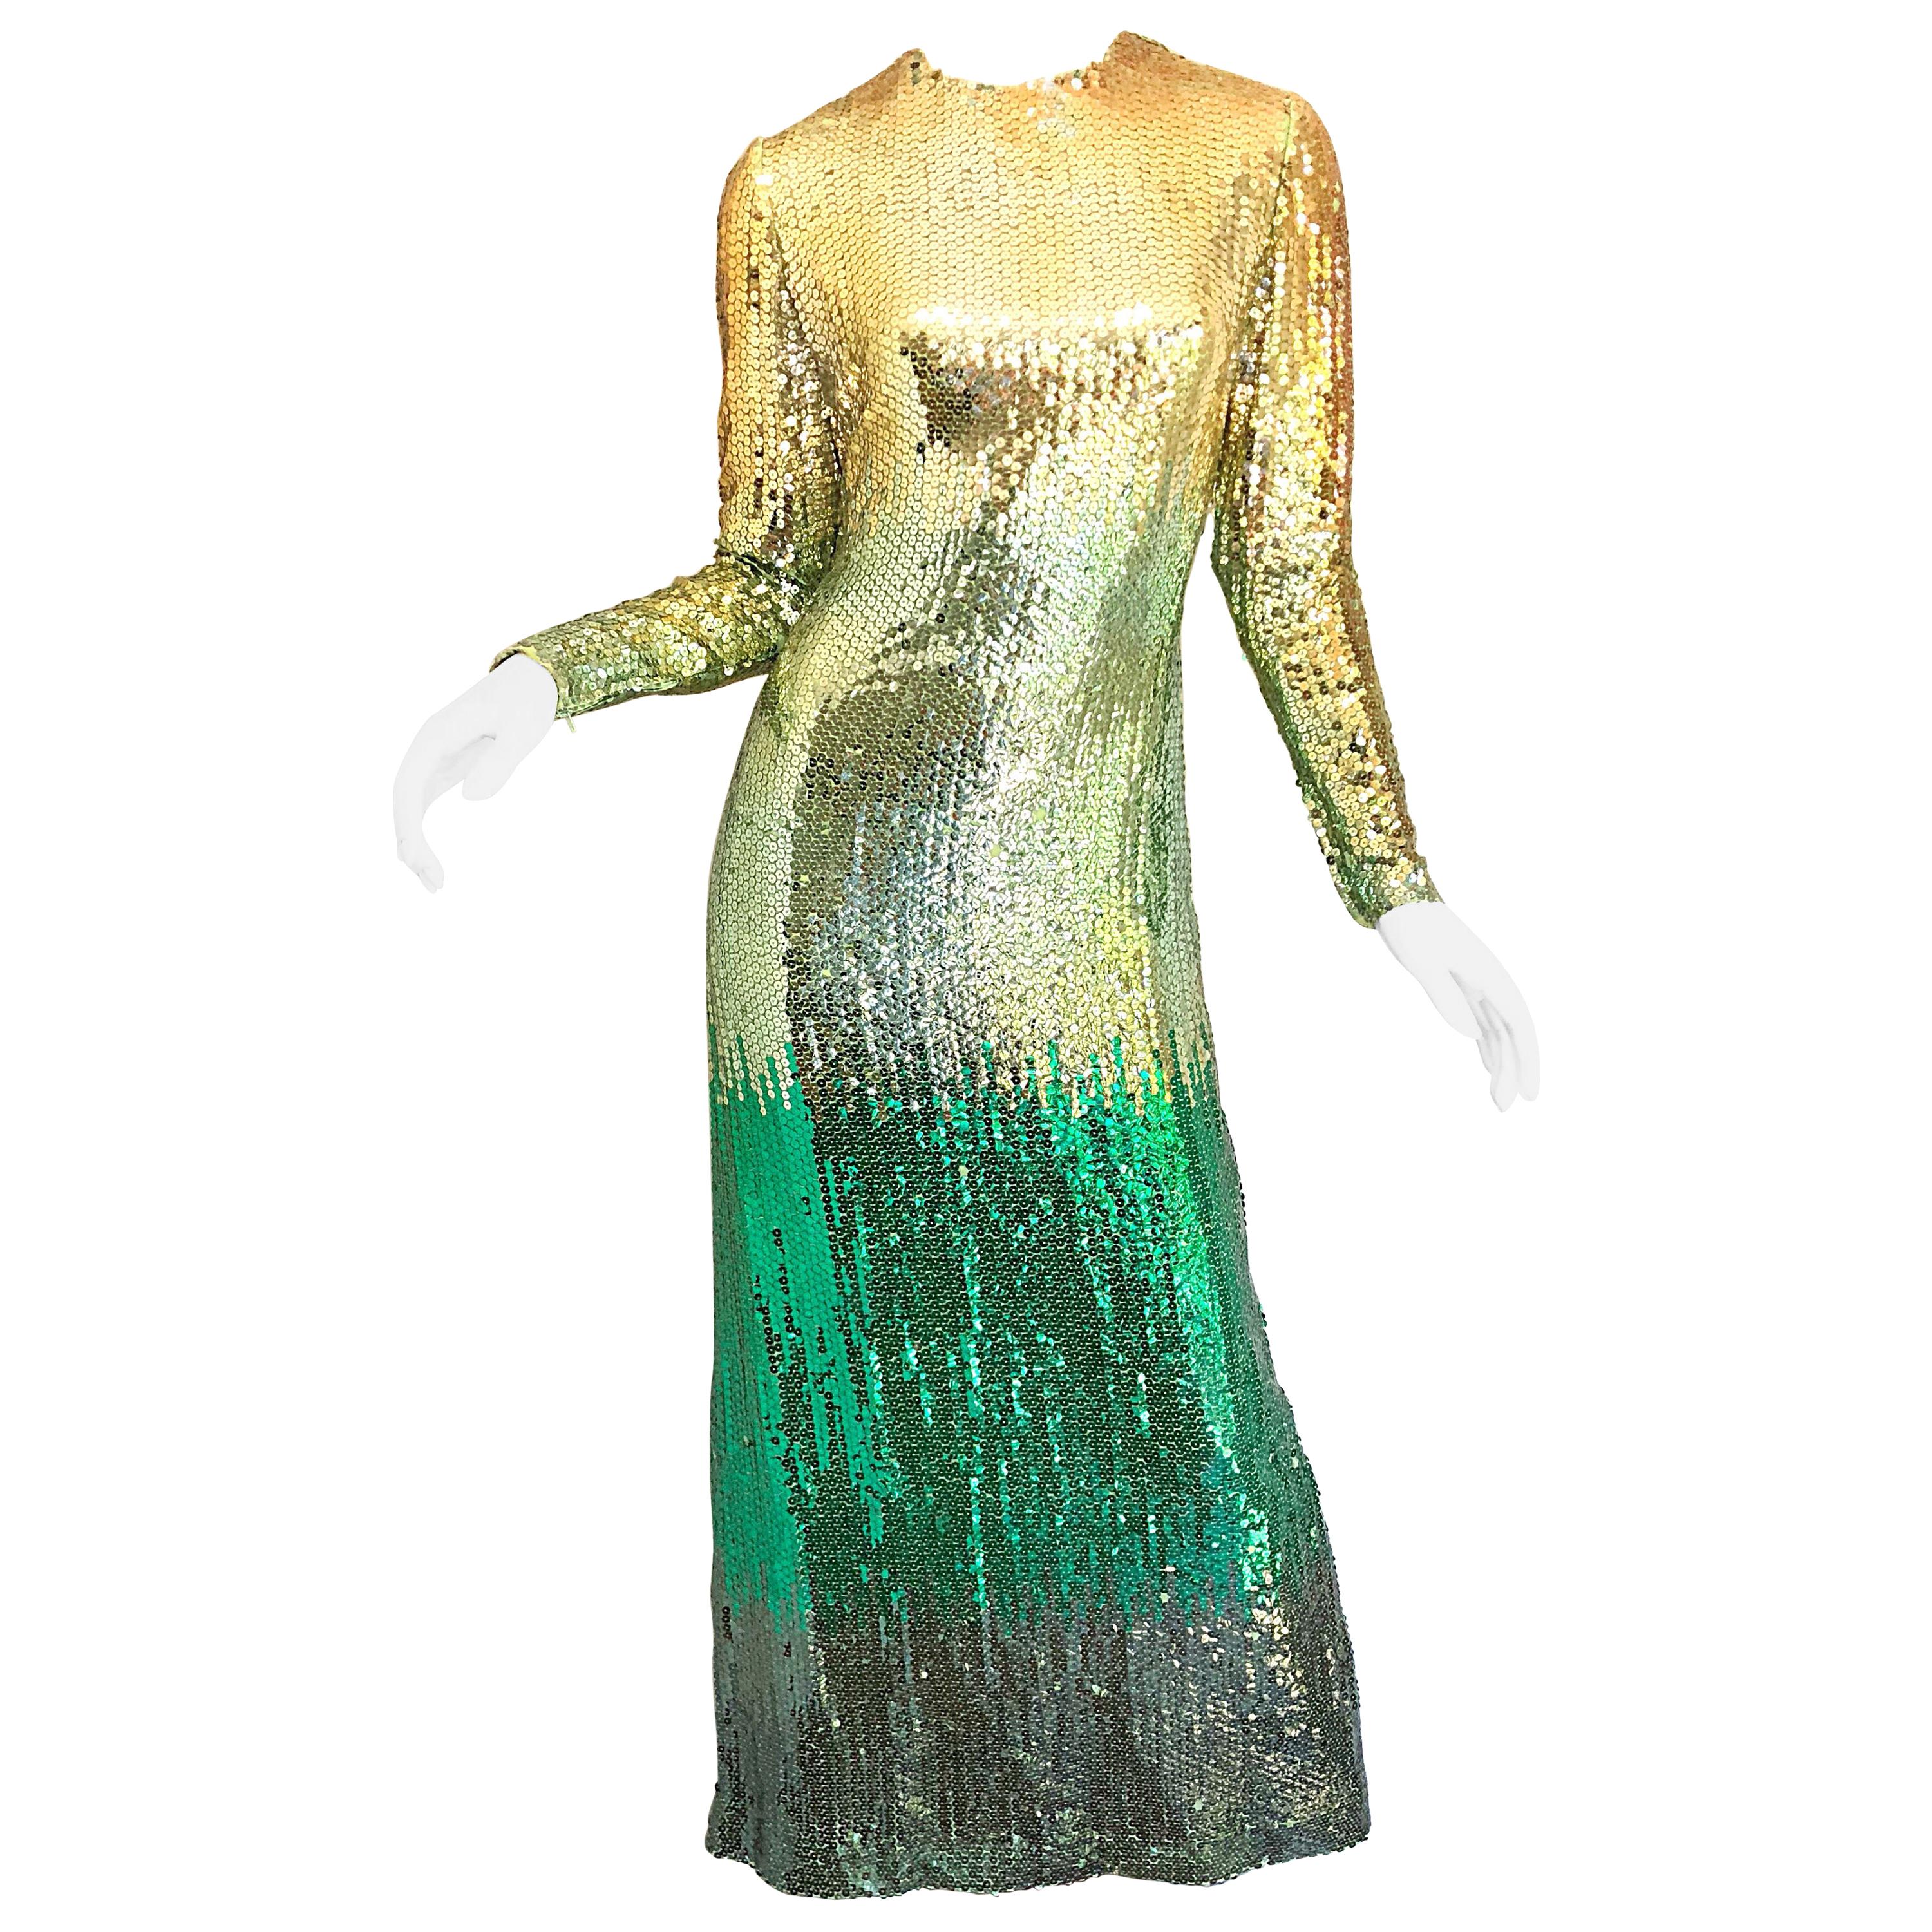 Amazing 1960s Bill Blass Gold + Green Ombre Sequined Vintage 60s Gown Dress